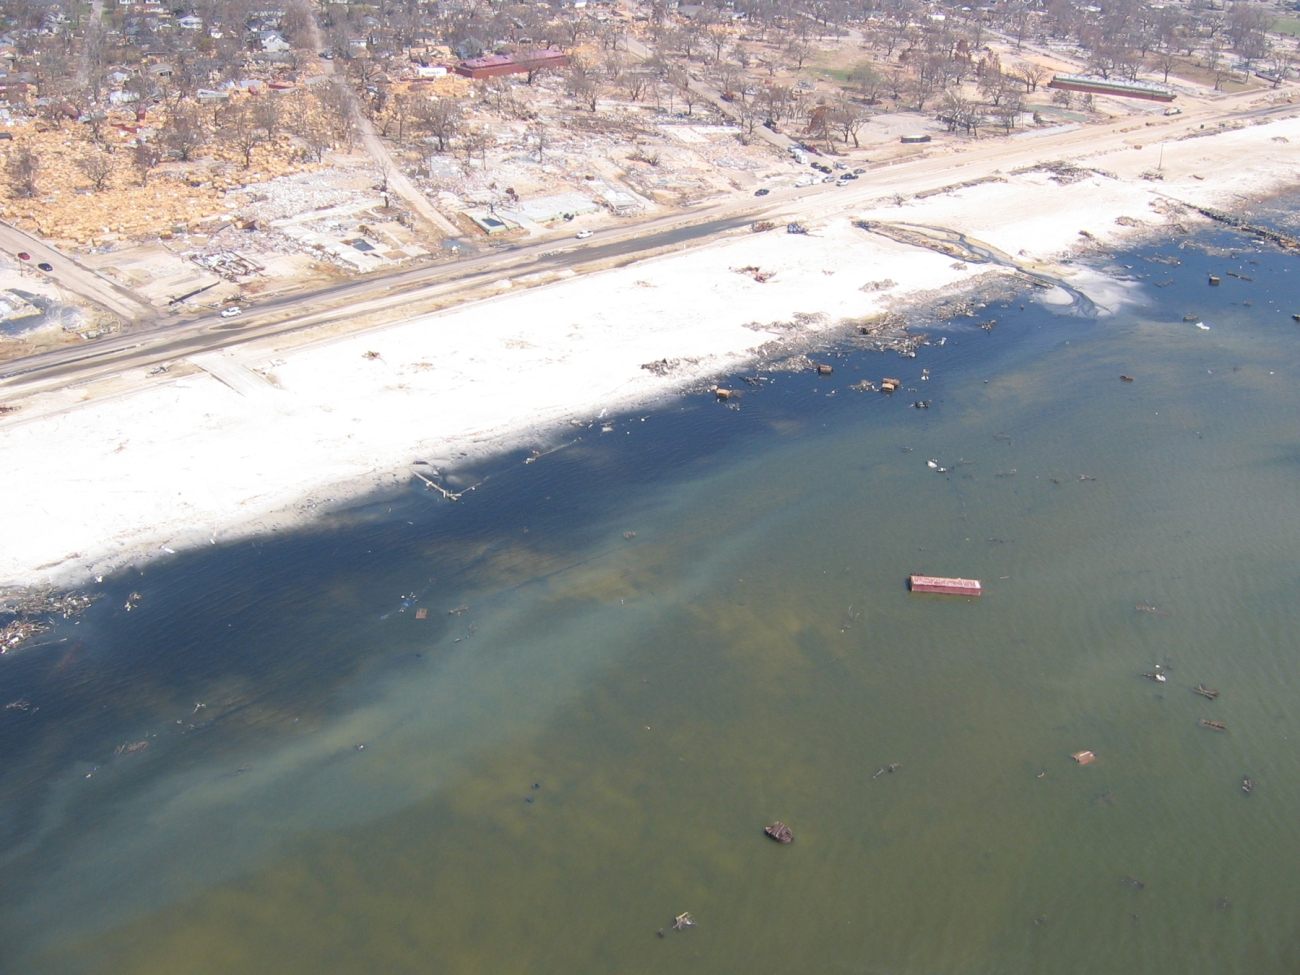 Debris from port facility strewn throughout Gulfport andecological damage to beach